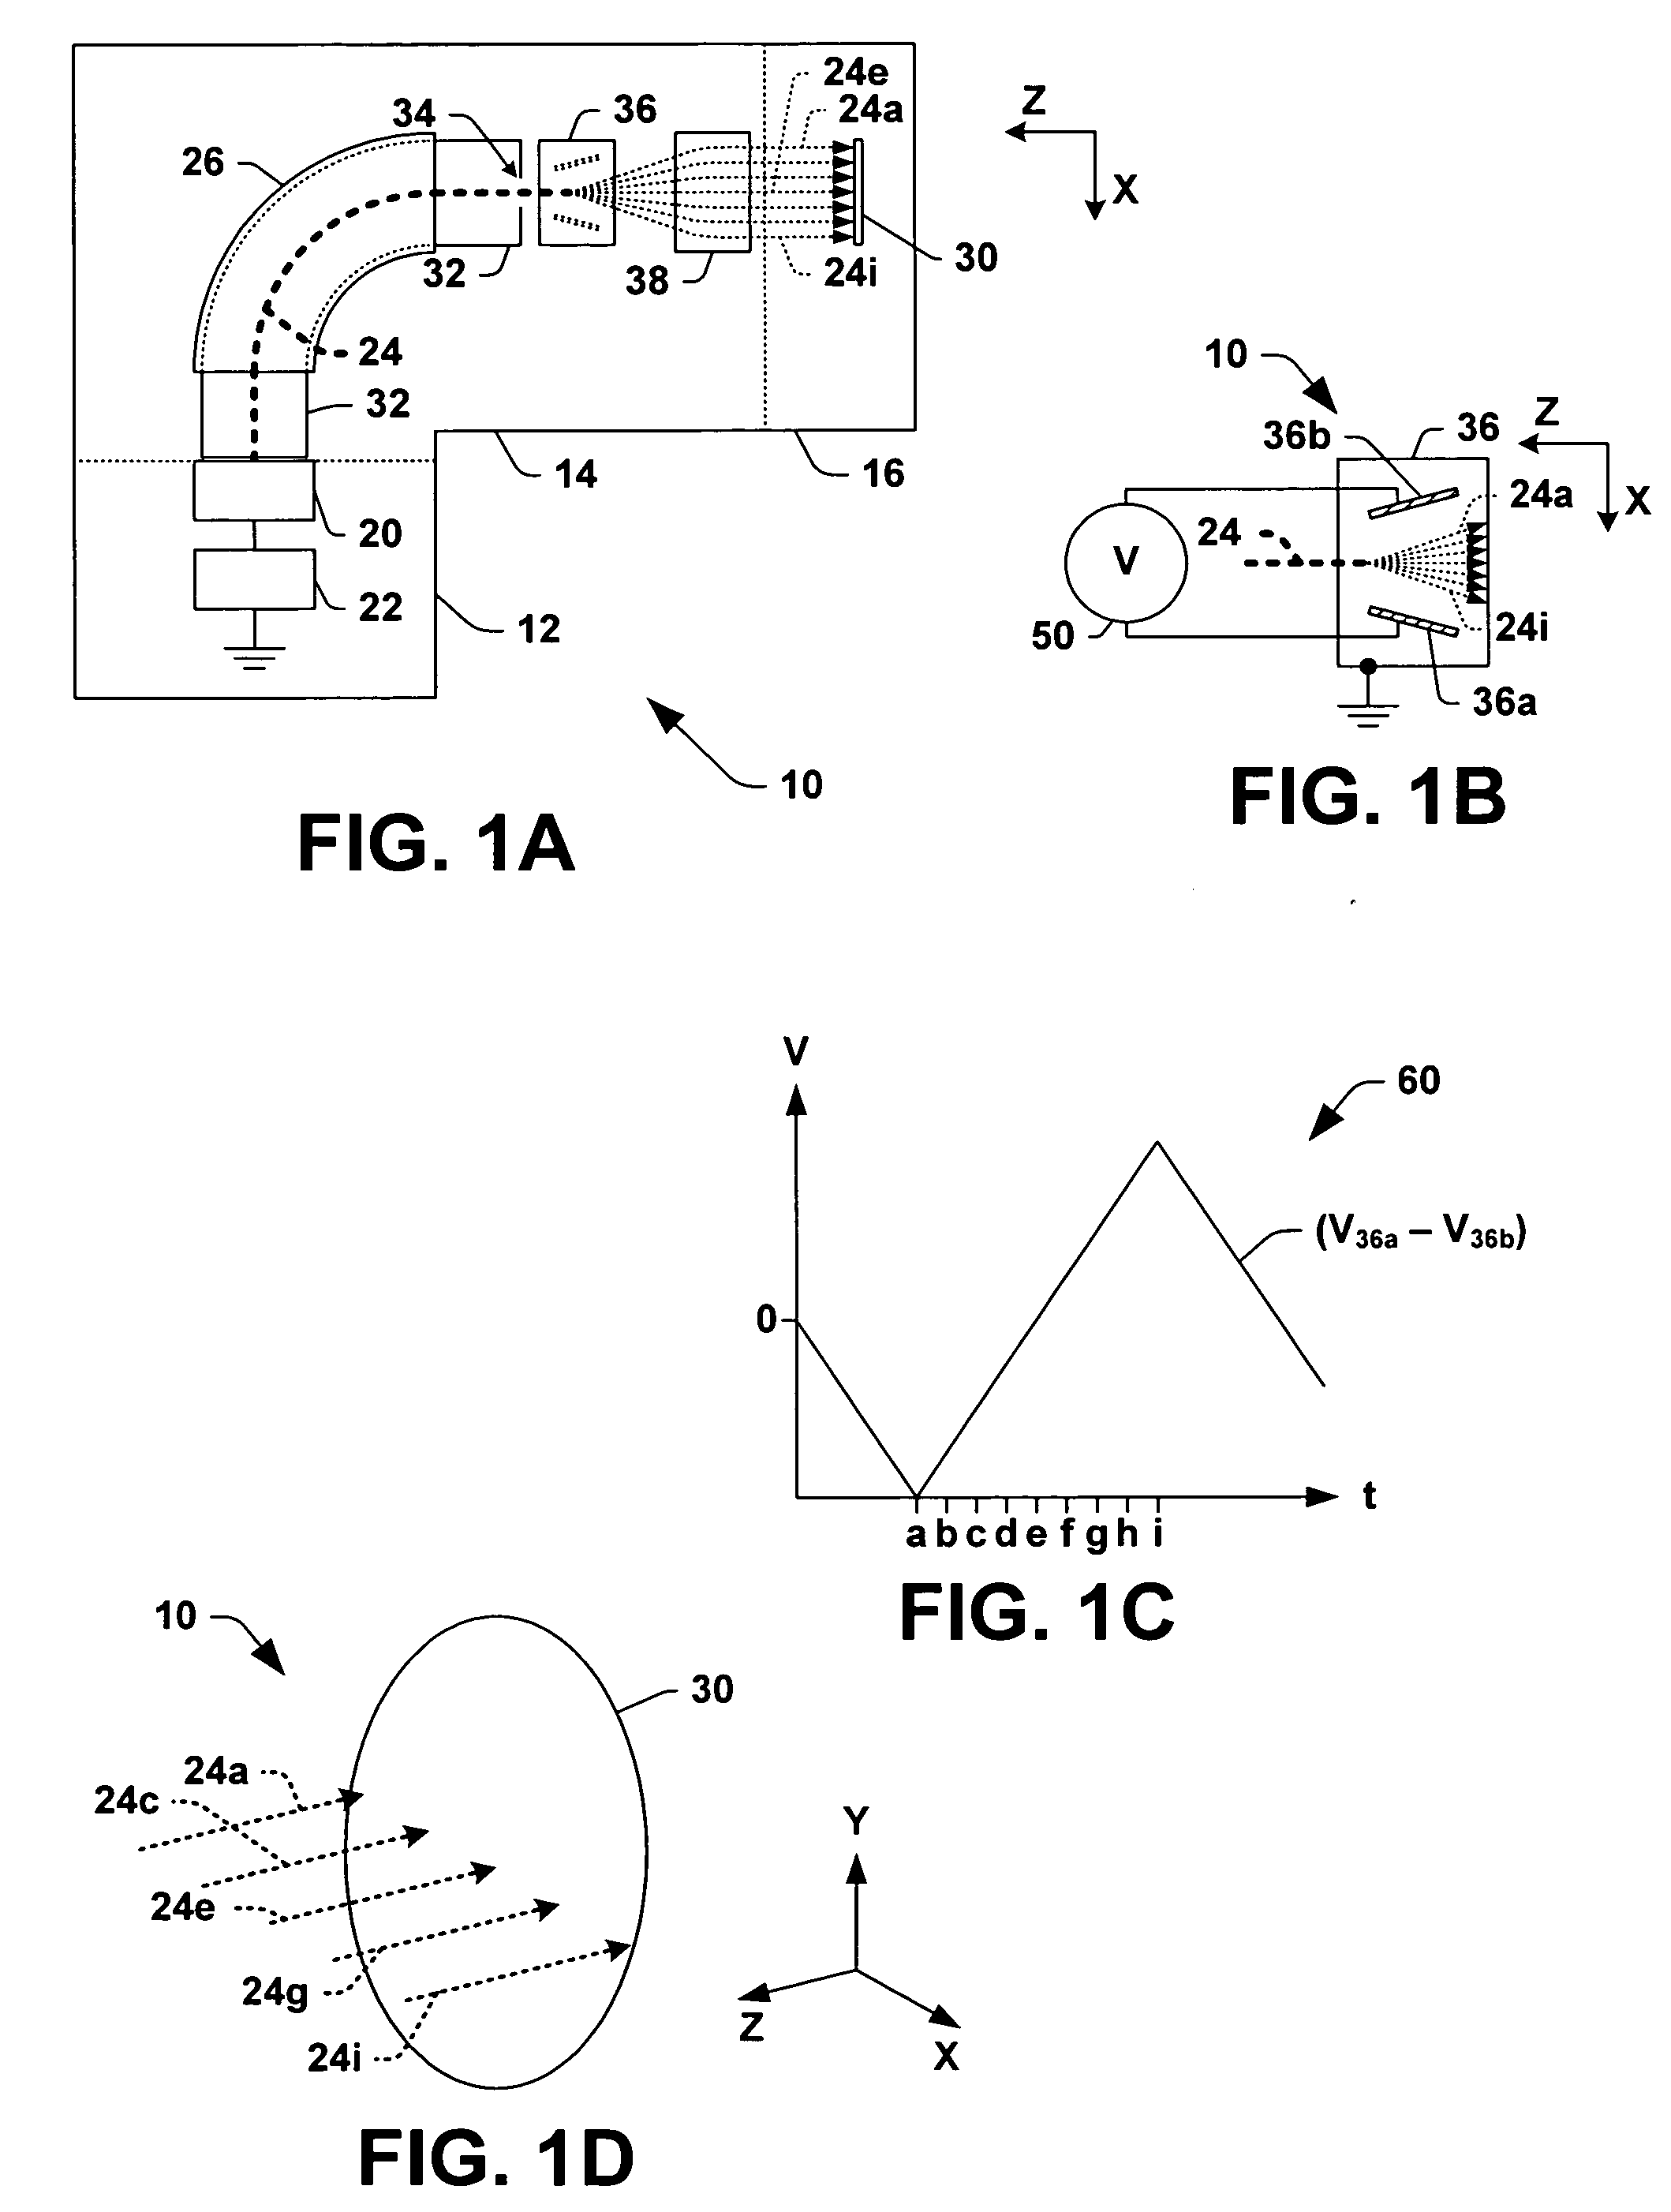 Ion beam scanning control methods and systems for ion implantation uniformity